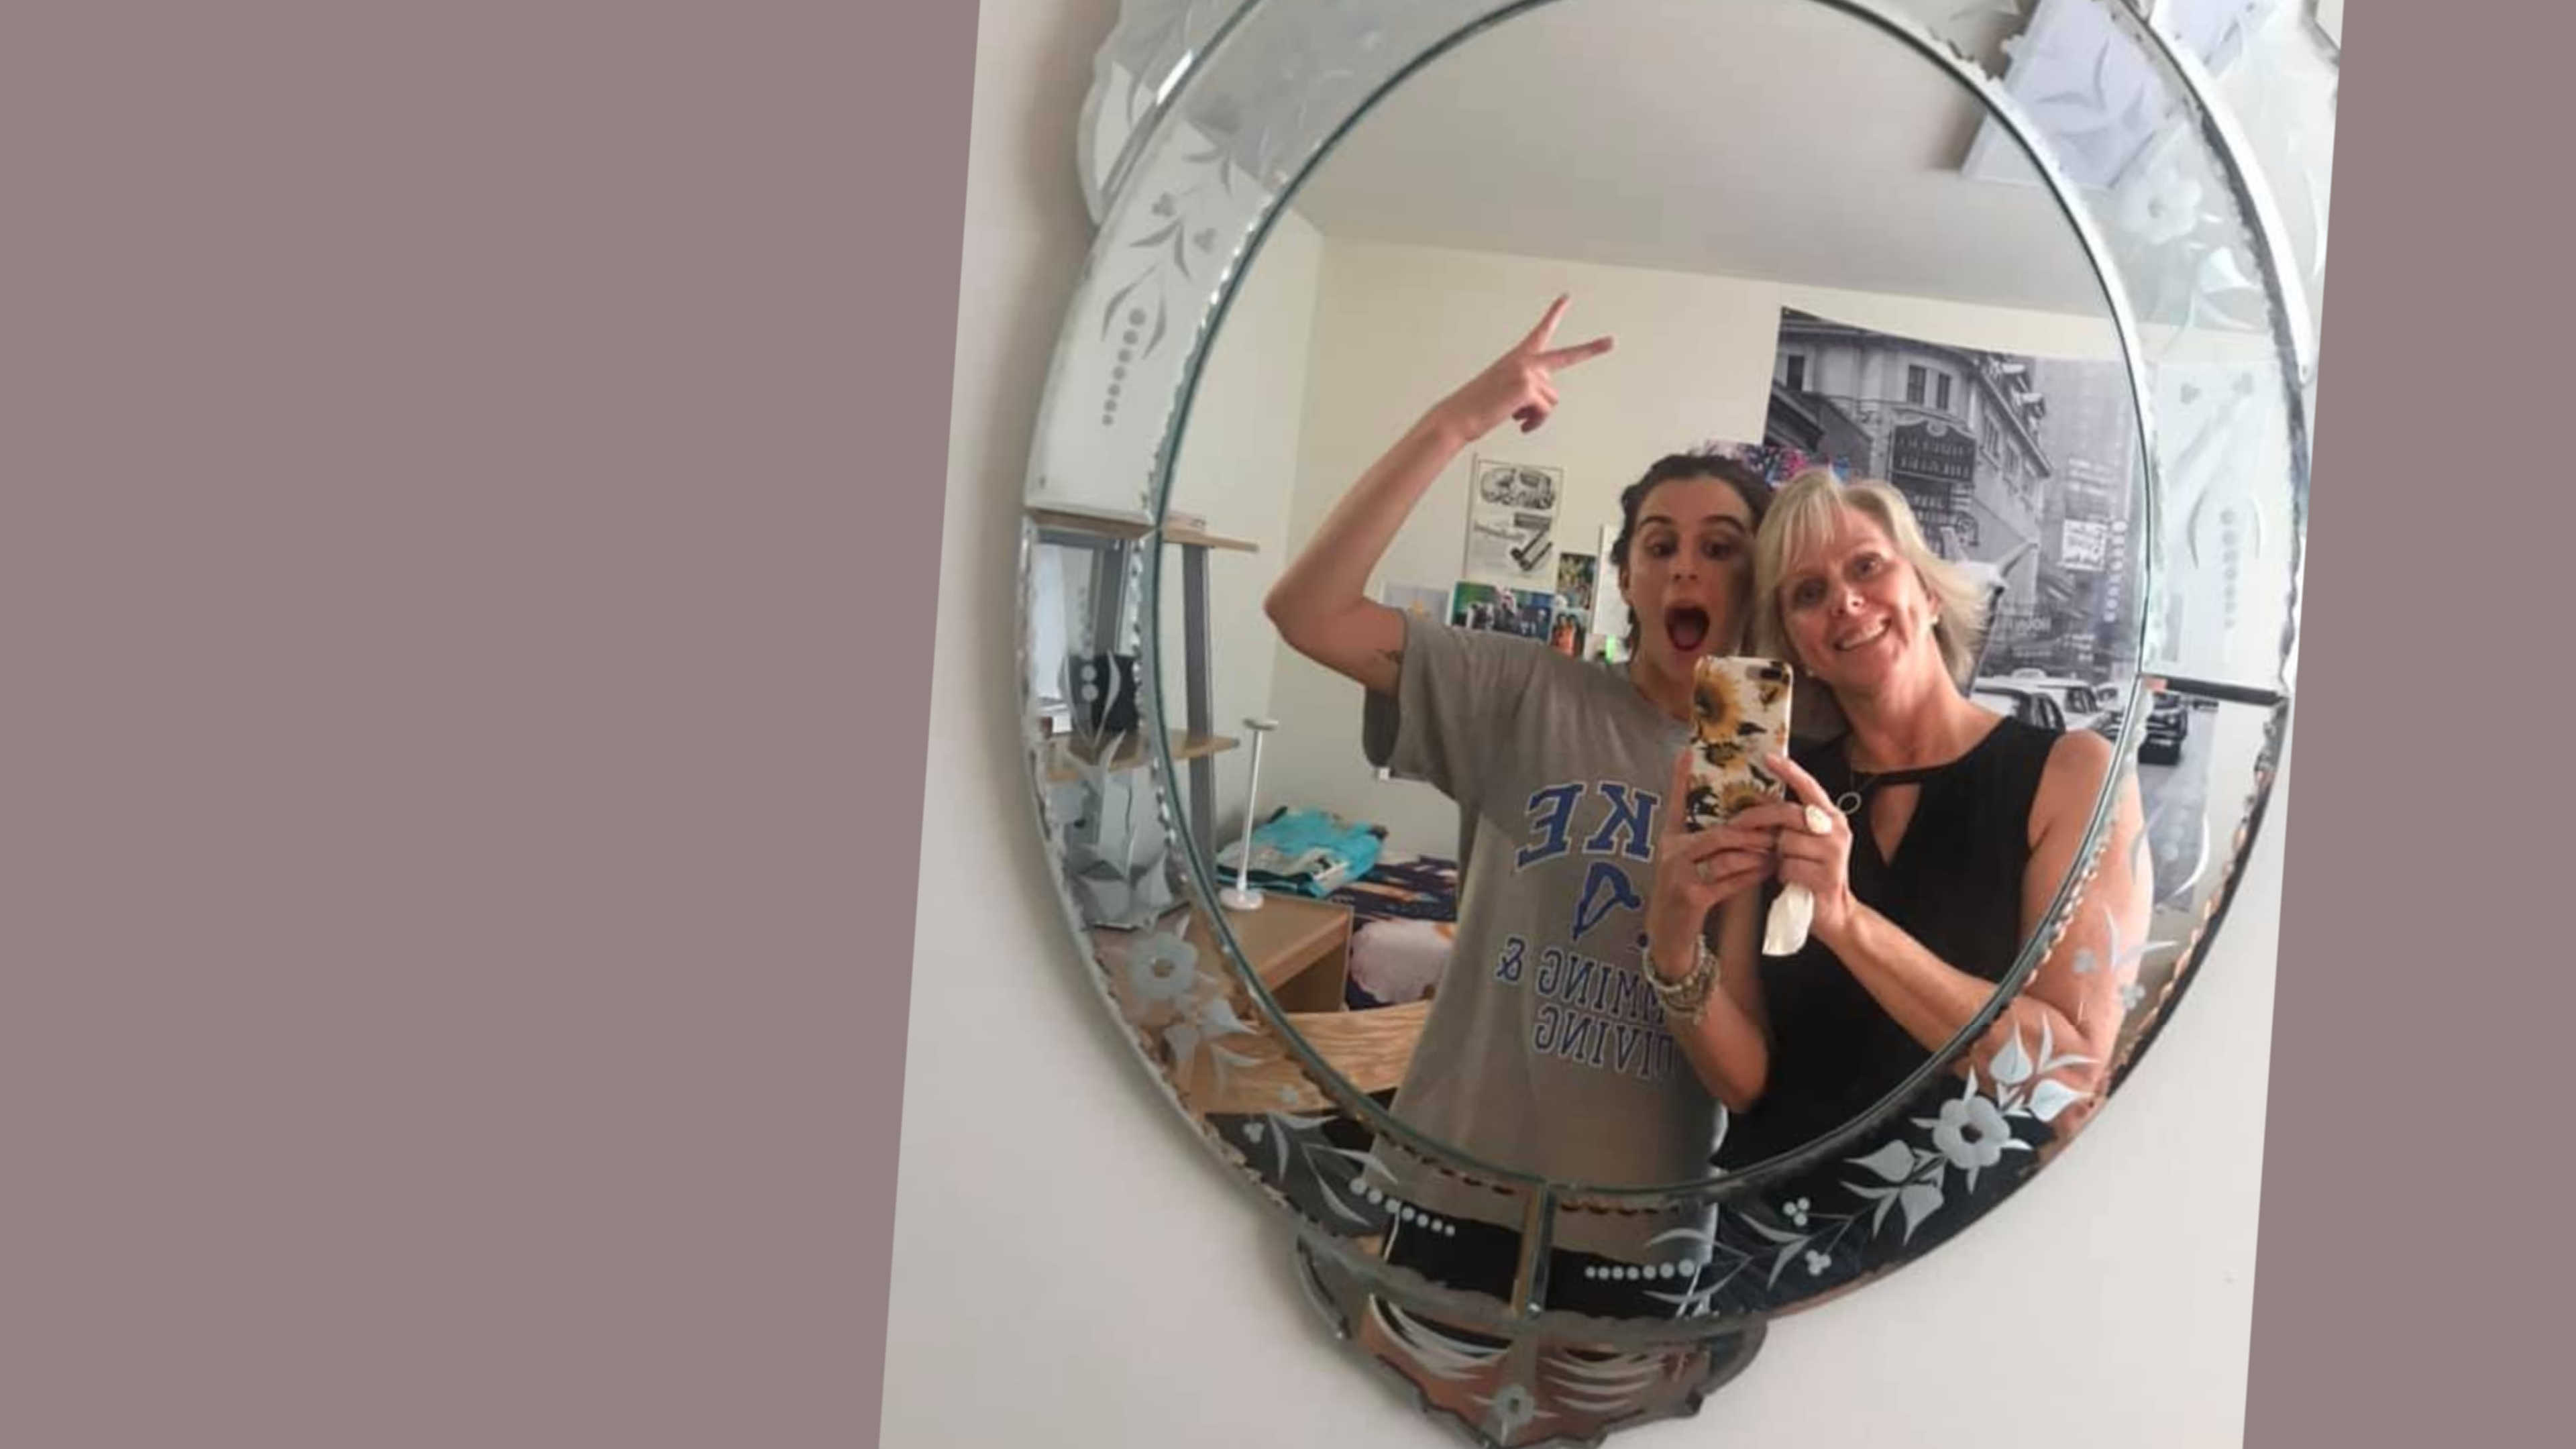 A mom and daughter take a silly mirror selfie during move-in.